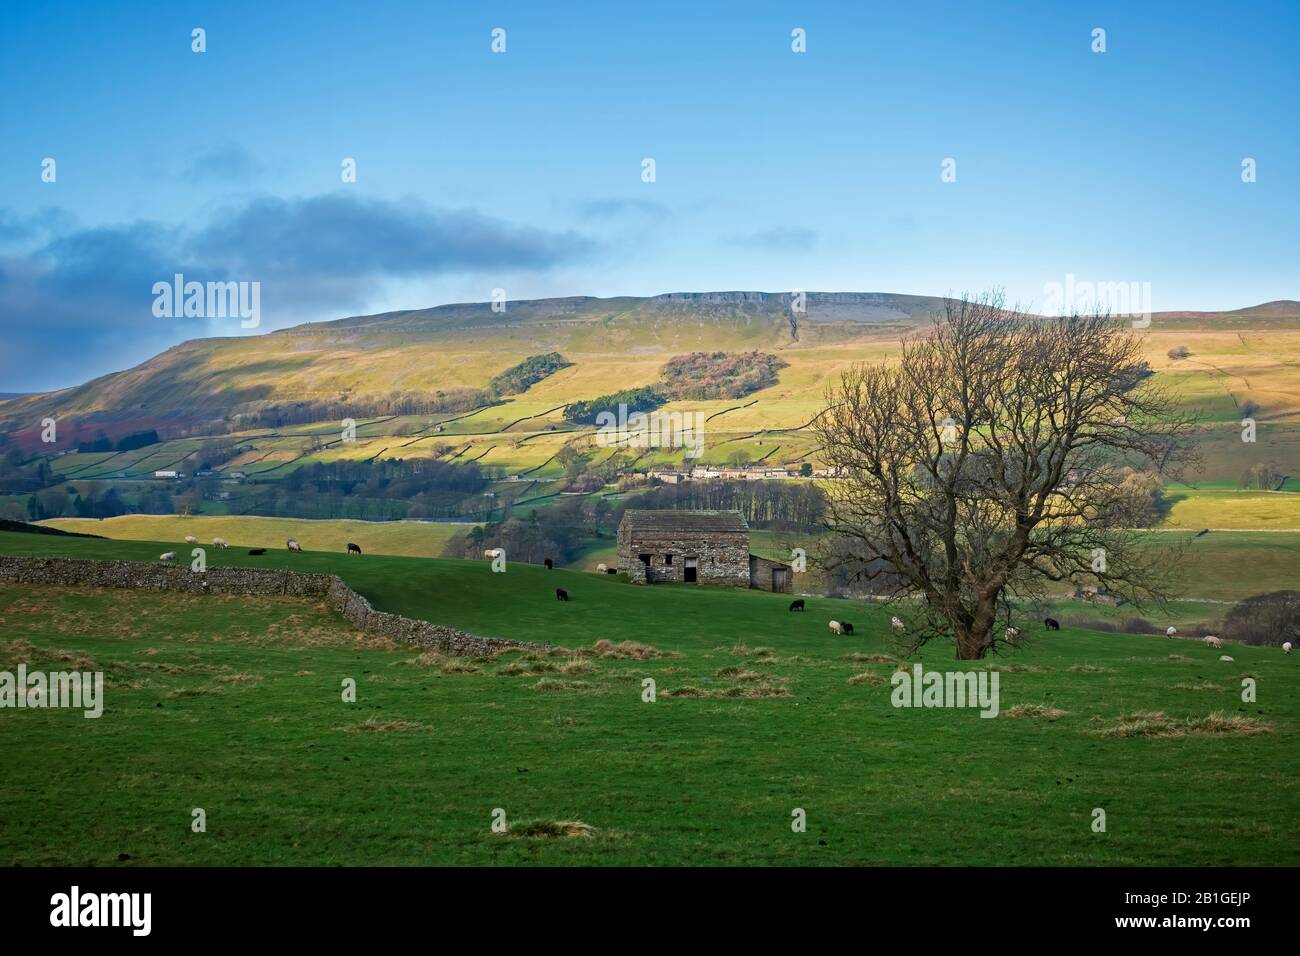 Stone Barn in Wensleydale, Yorkshire Dales, with views towards Askrigg Common Stock Photo